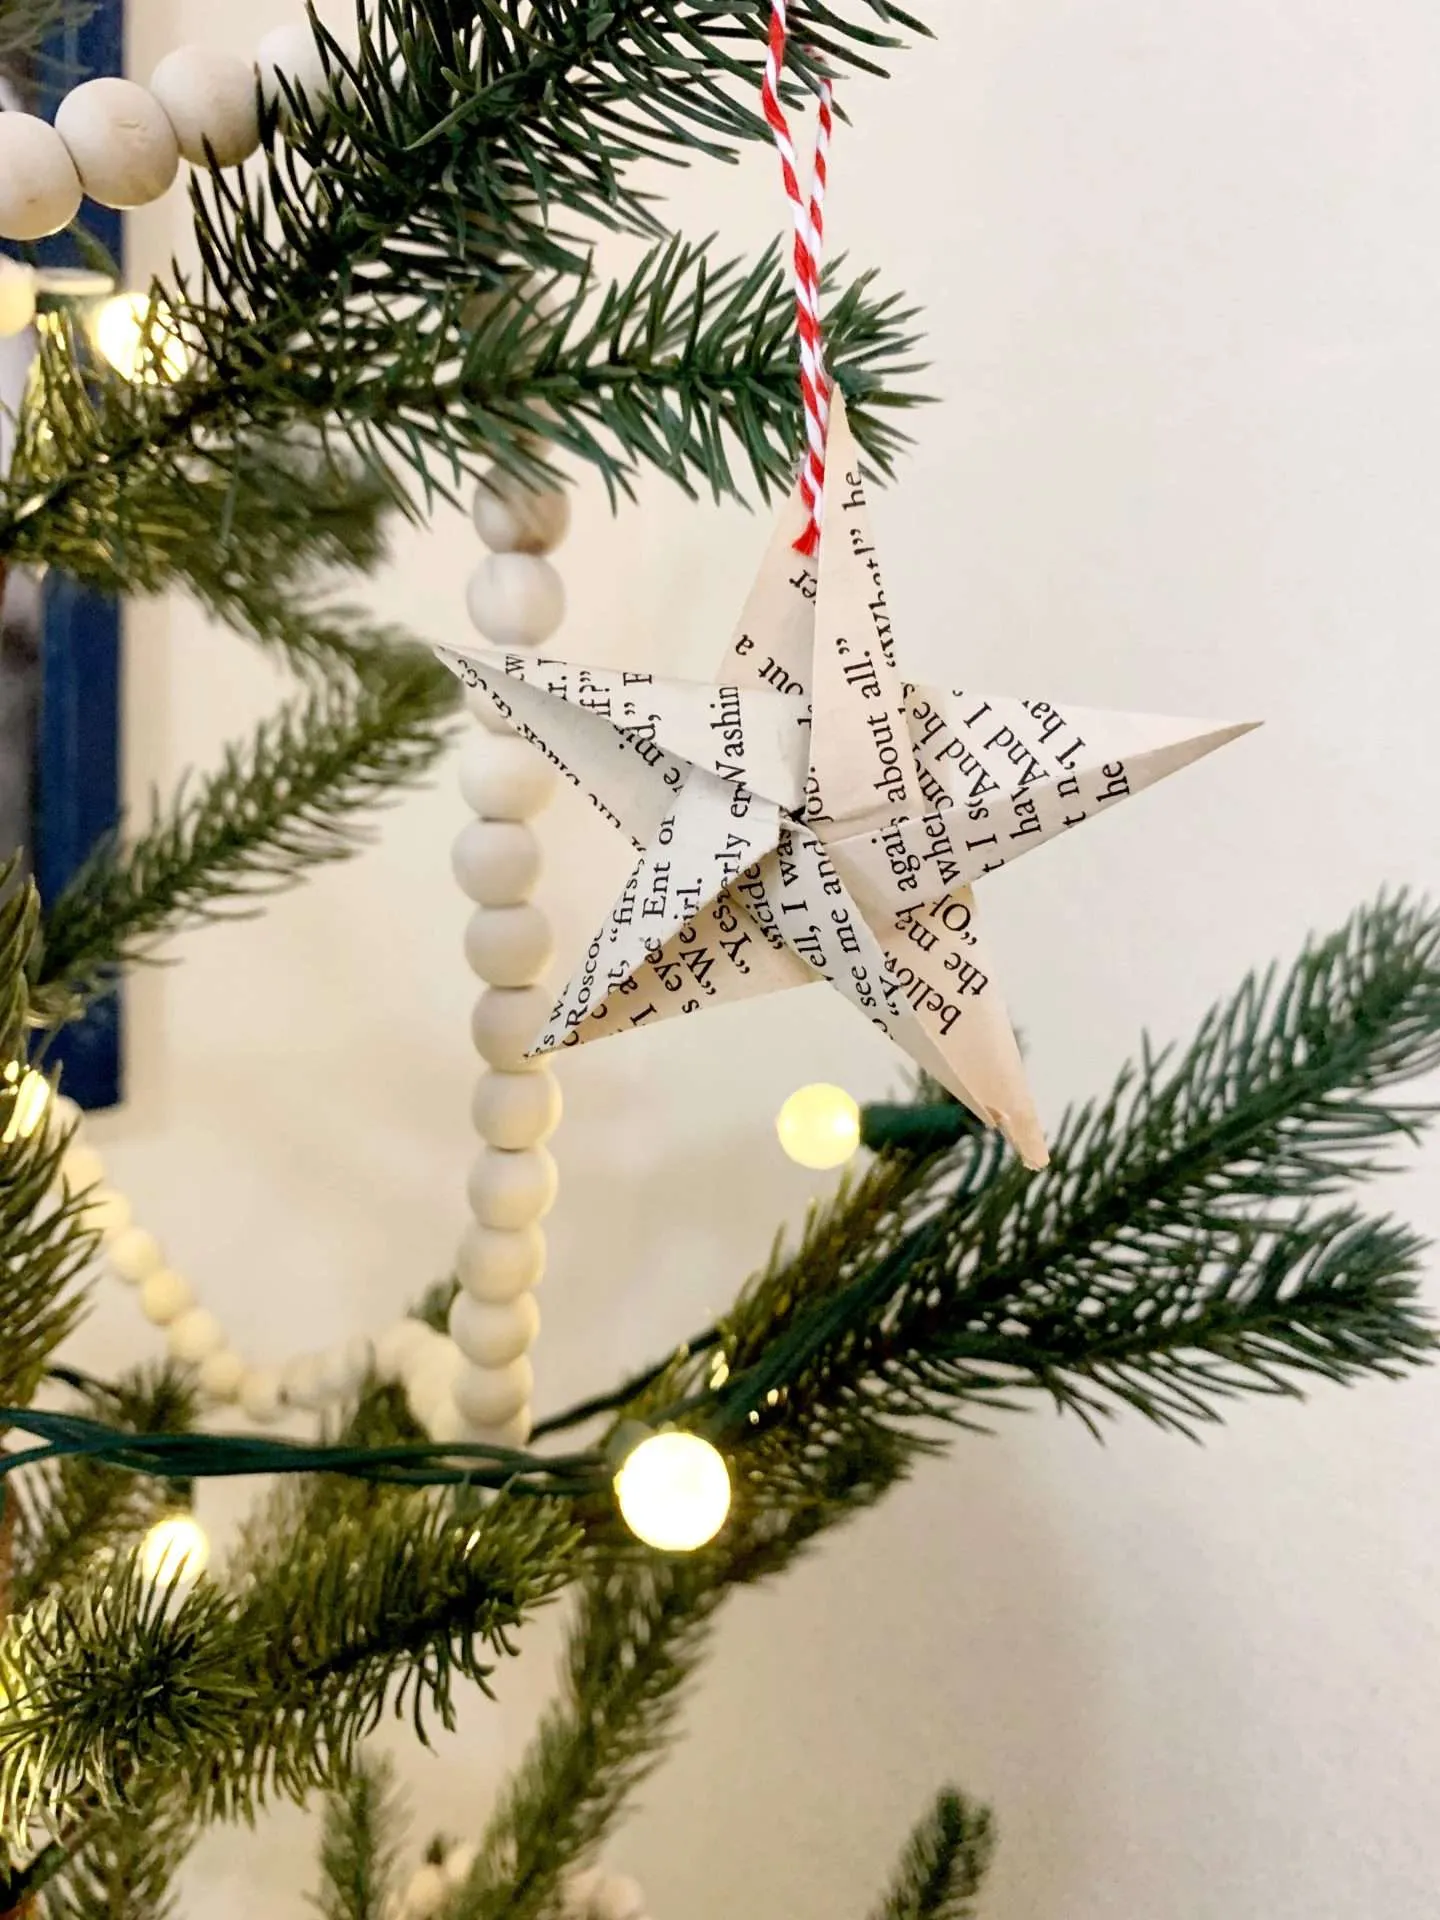 Origami stars made from vintage book pages on a bookish Christmas tree.